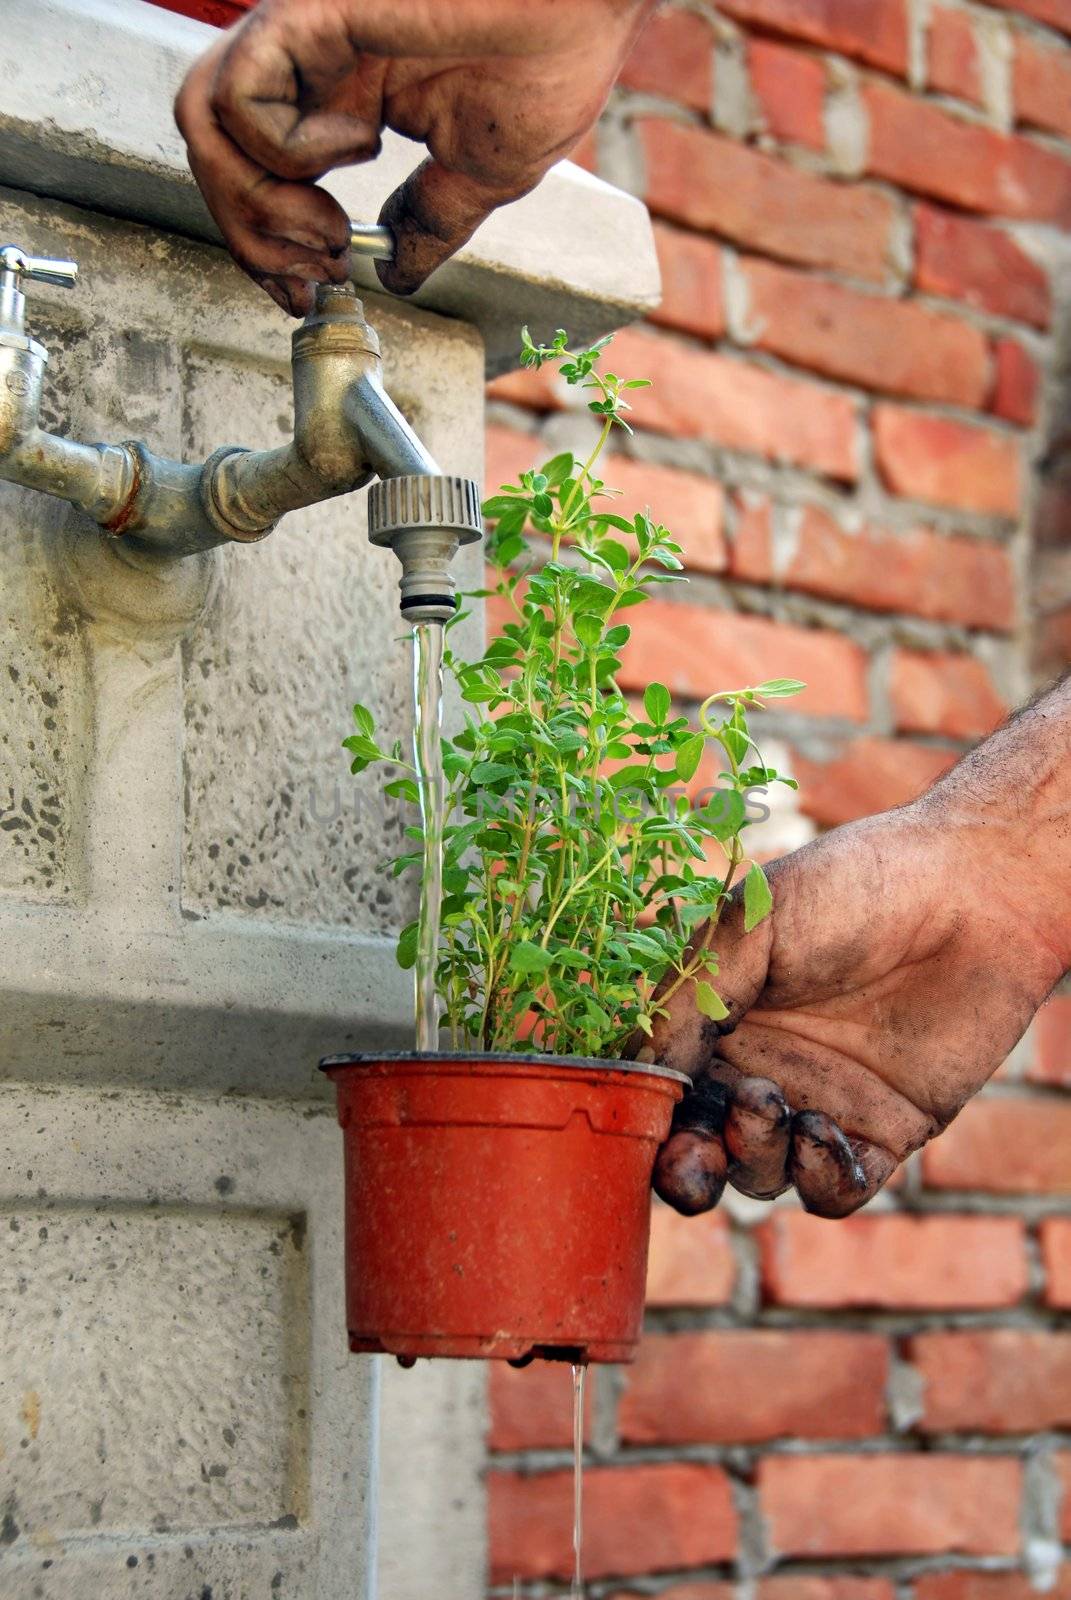 Watering a pot by simply